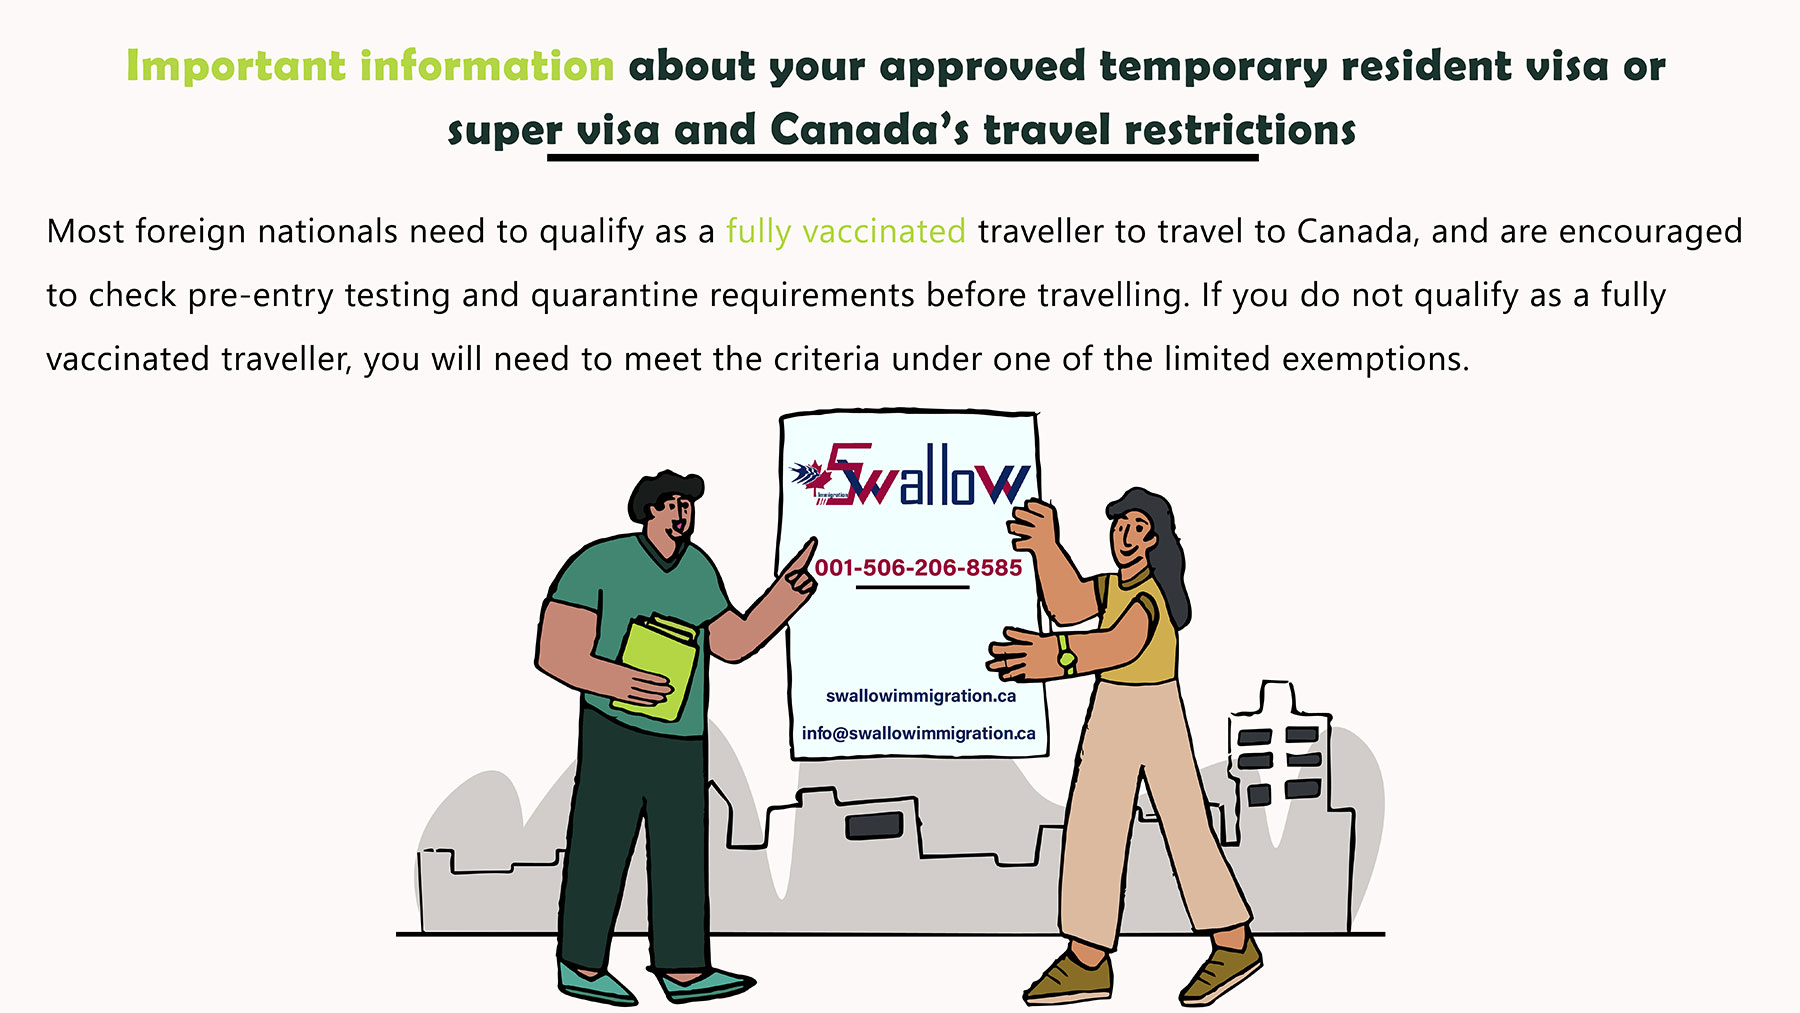 Important information about your approved temporary resident visa or super visa and Canada’s travel restrictions